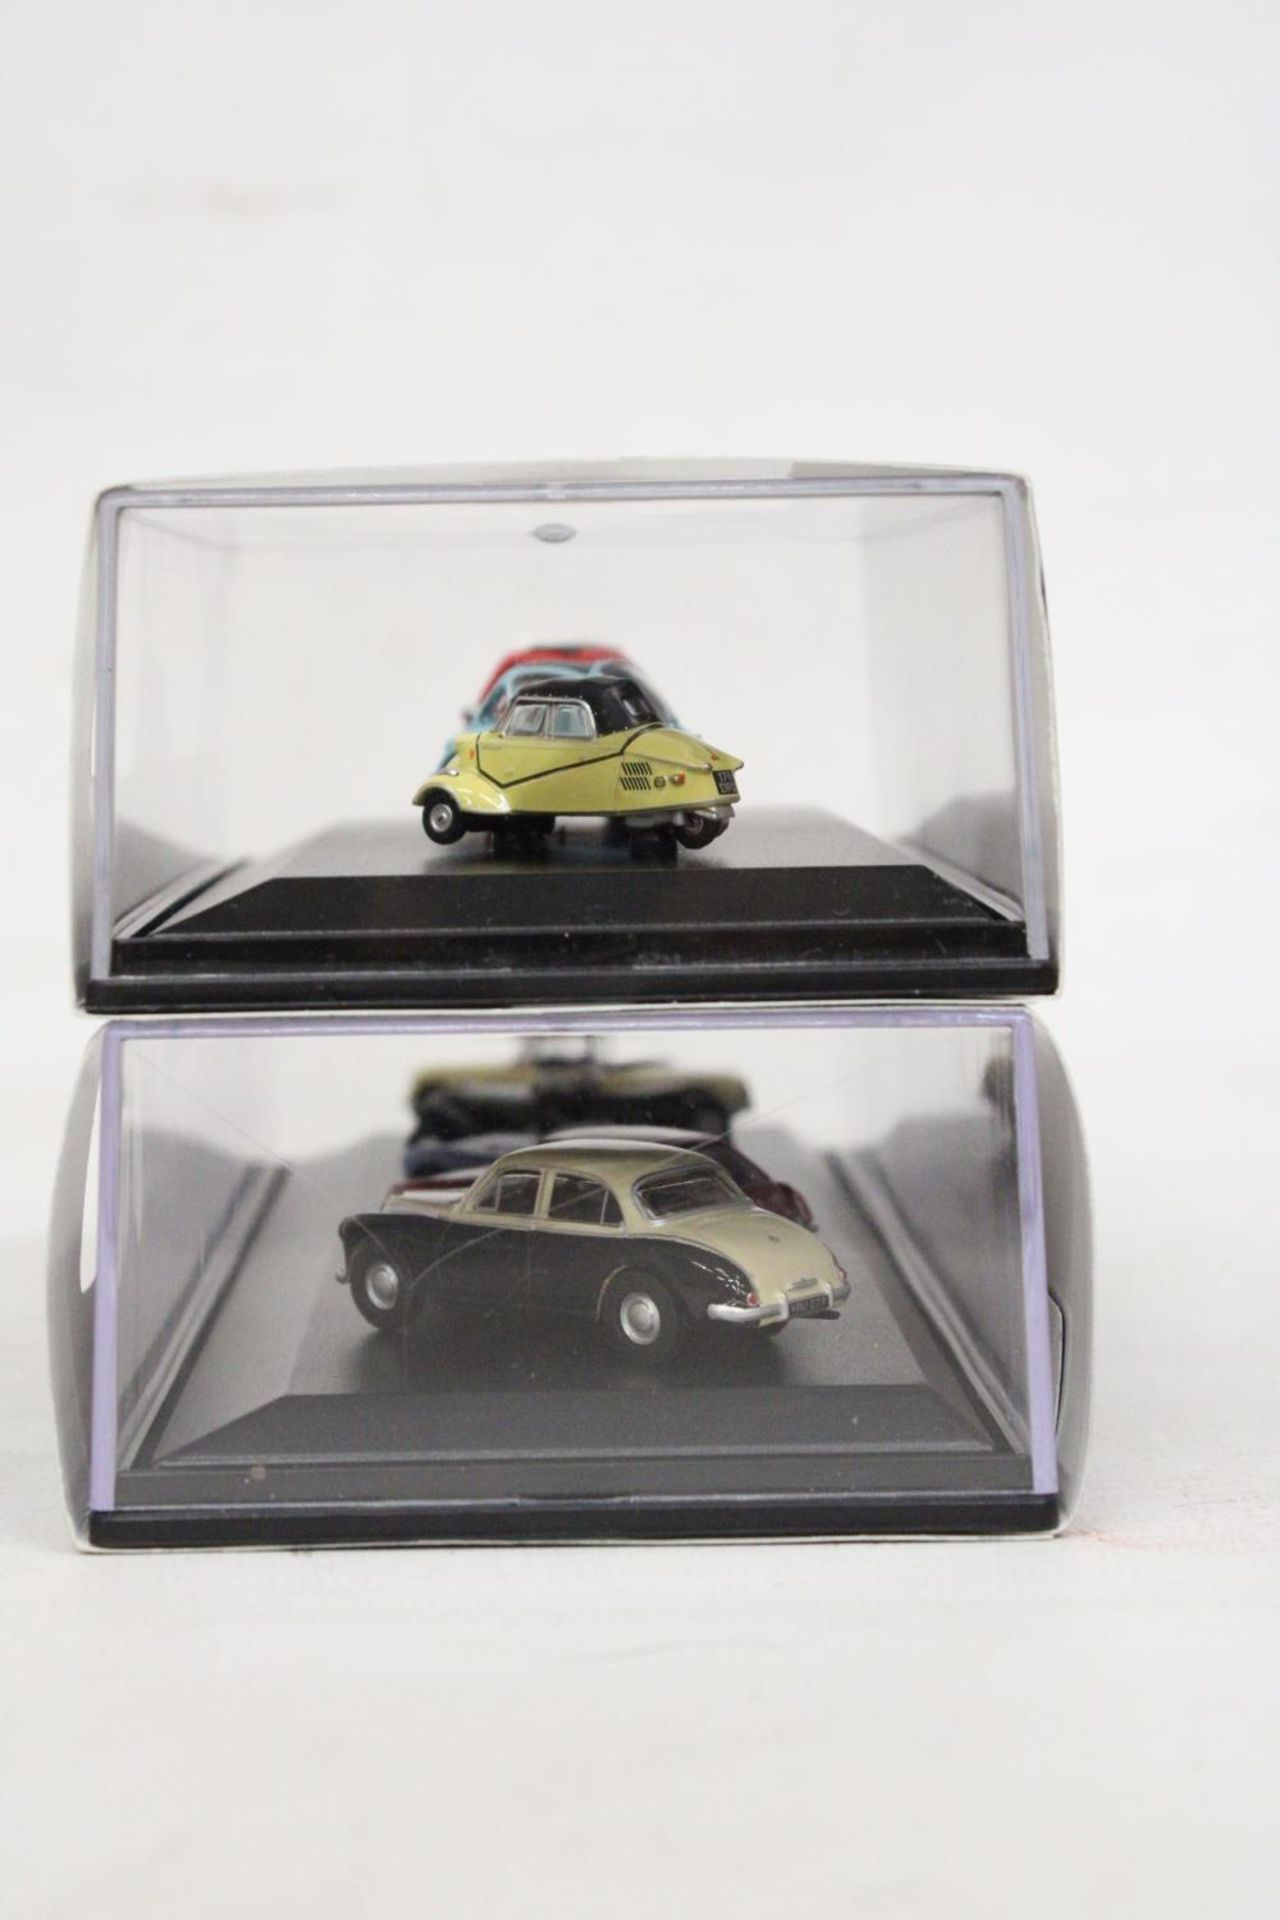 TWO OXFORD AS NEW AND BOXED AUTOMOBILE COMPANY SETS TO INCLUDE A FIVE PIECE MG SET AND A THREE PIECE - Image 8 of 8